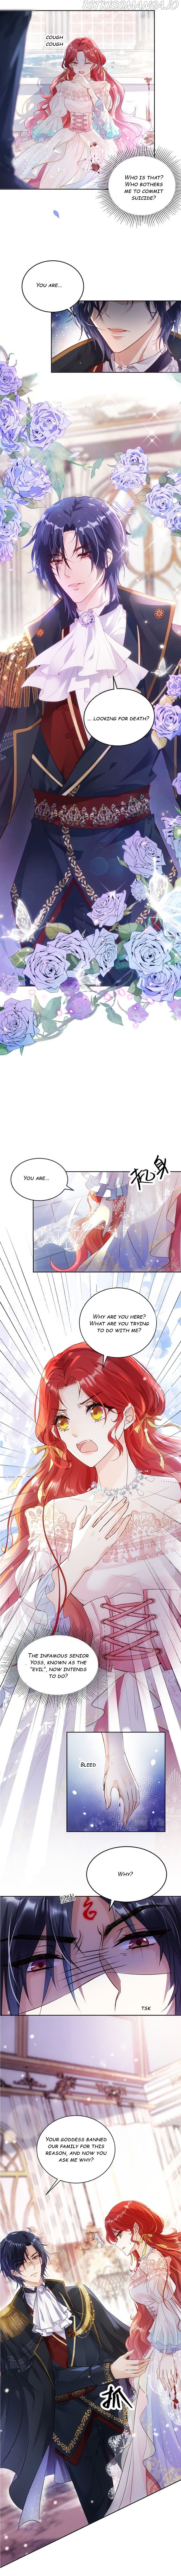 Did The Goddess Survive Today? - Page 3